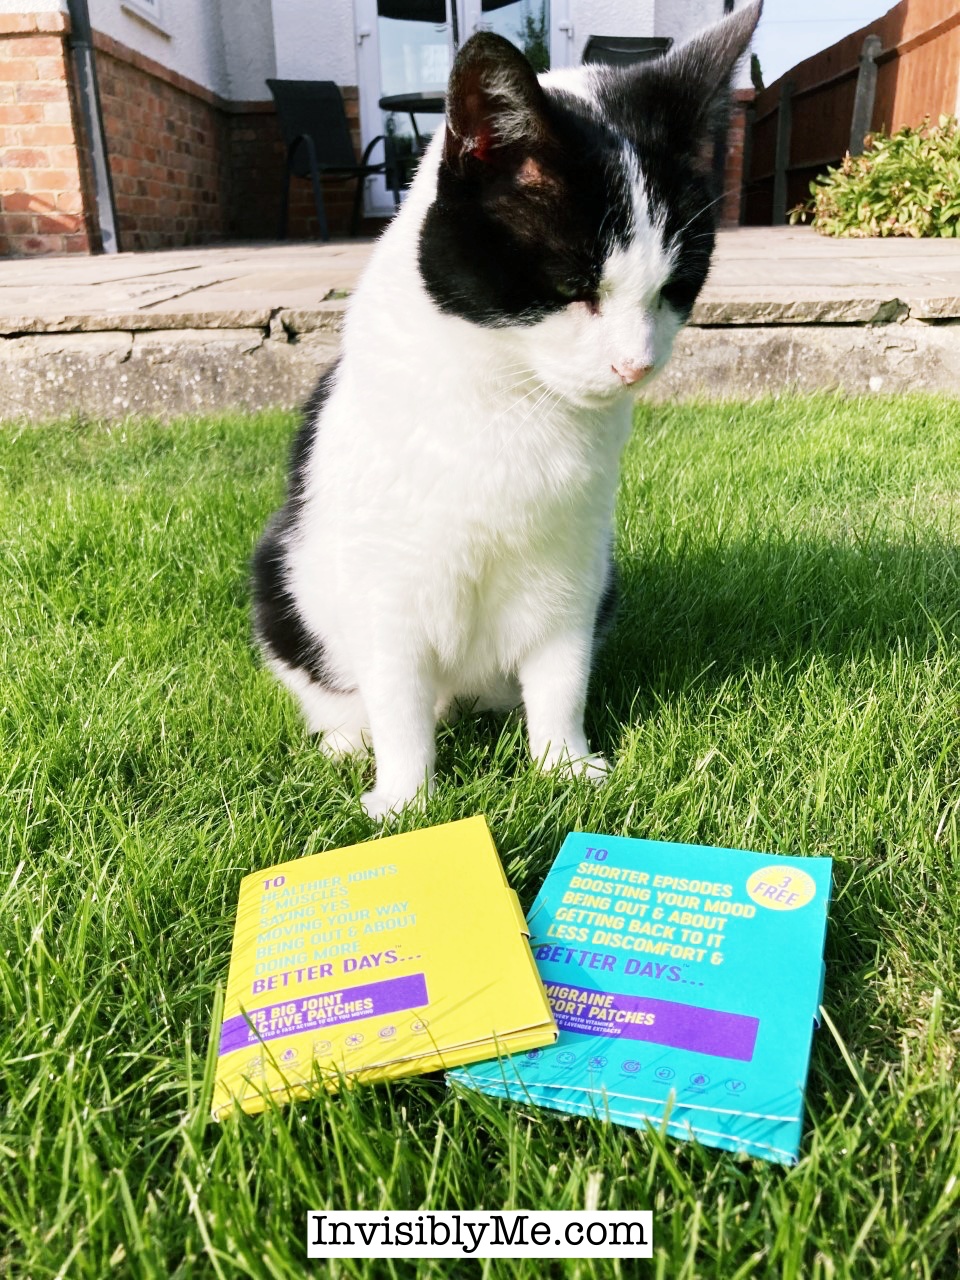 A photo on the grass in my garden showing my black and white cat, Virgil, looking down at the two To Better Days packs of pain patches laid out in front of him.